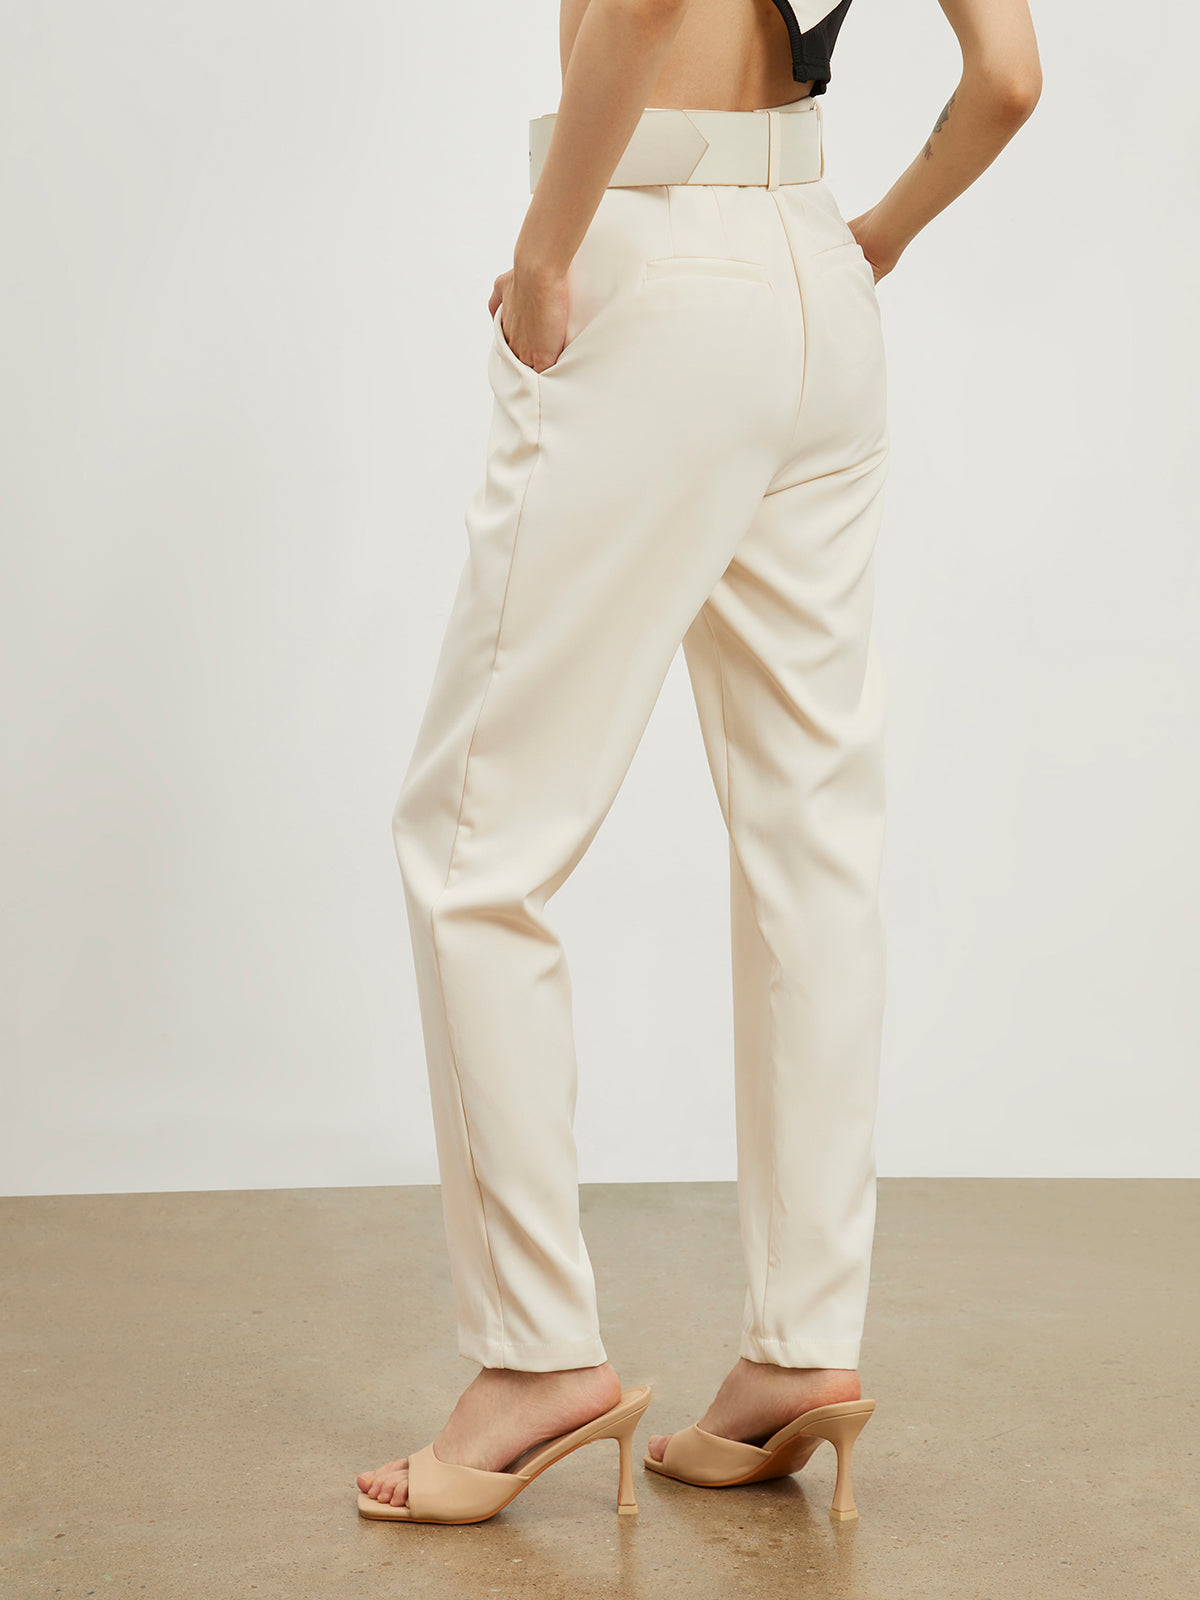 Utility Belted Straight Leg Pants